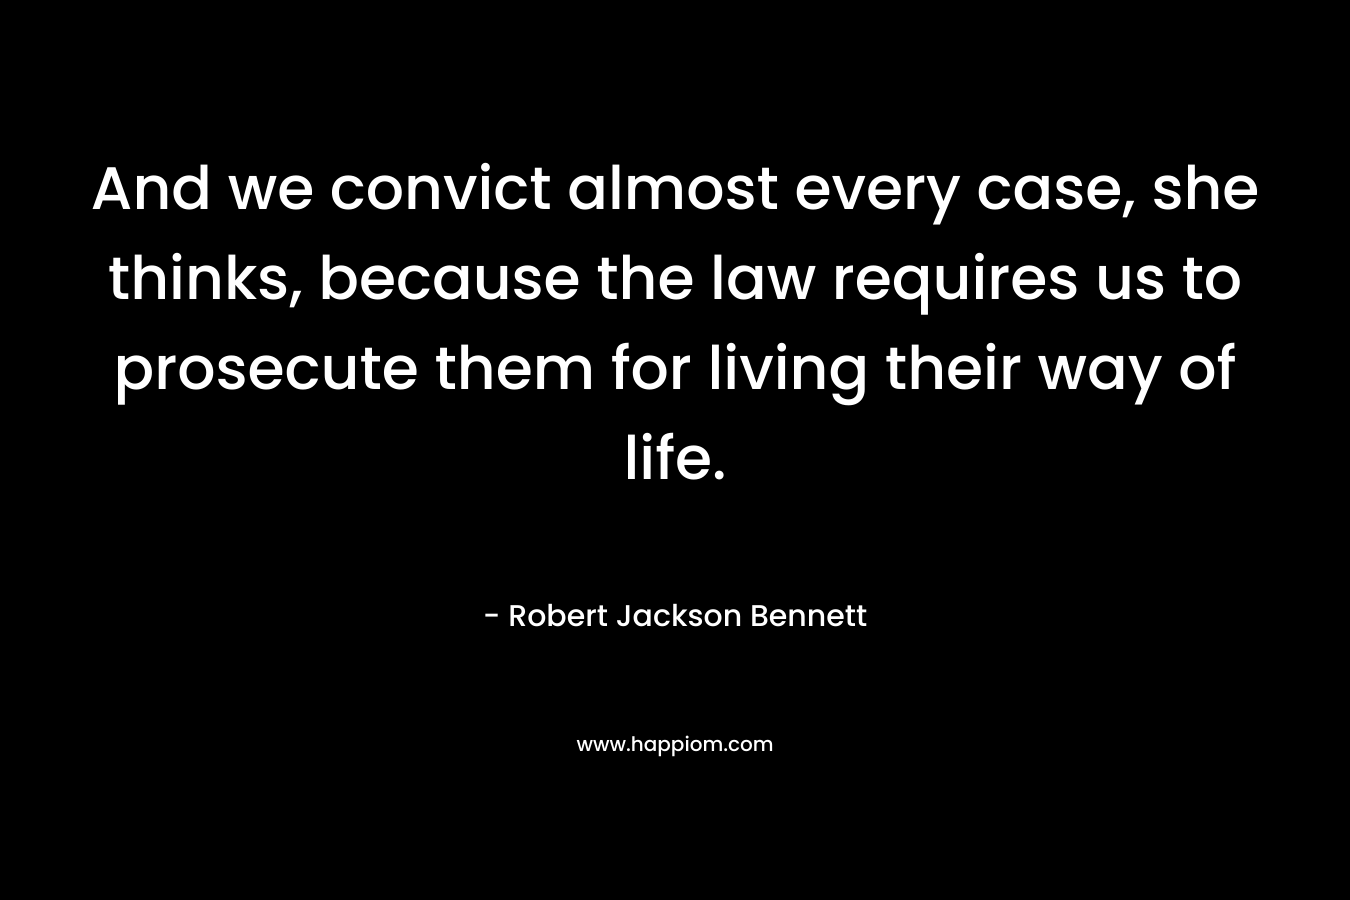 And we convict almost every case, she thinks, because the law requires us to prosecute them for living their way of life. – Robert Jackson Bennett